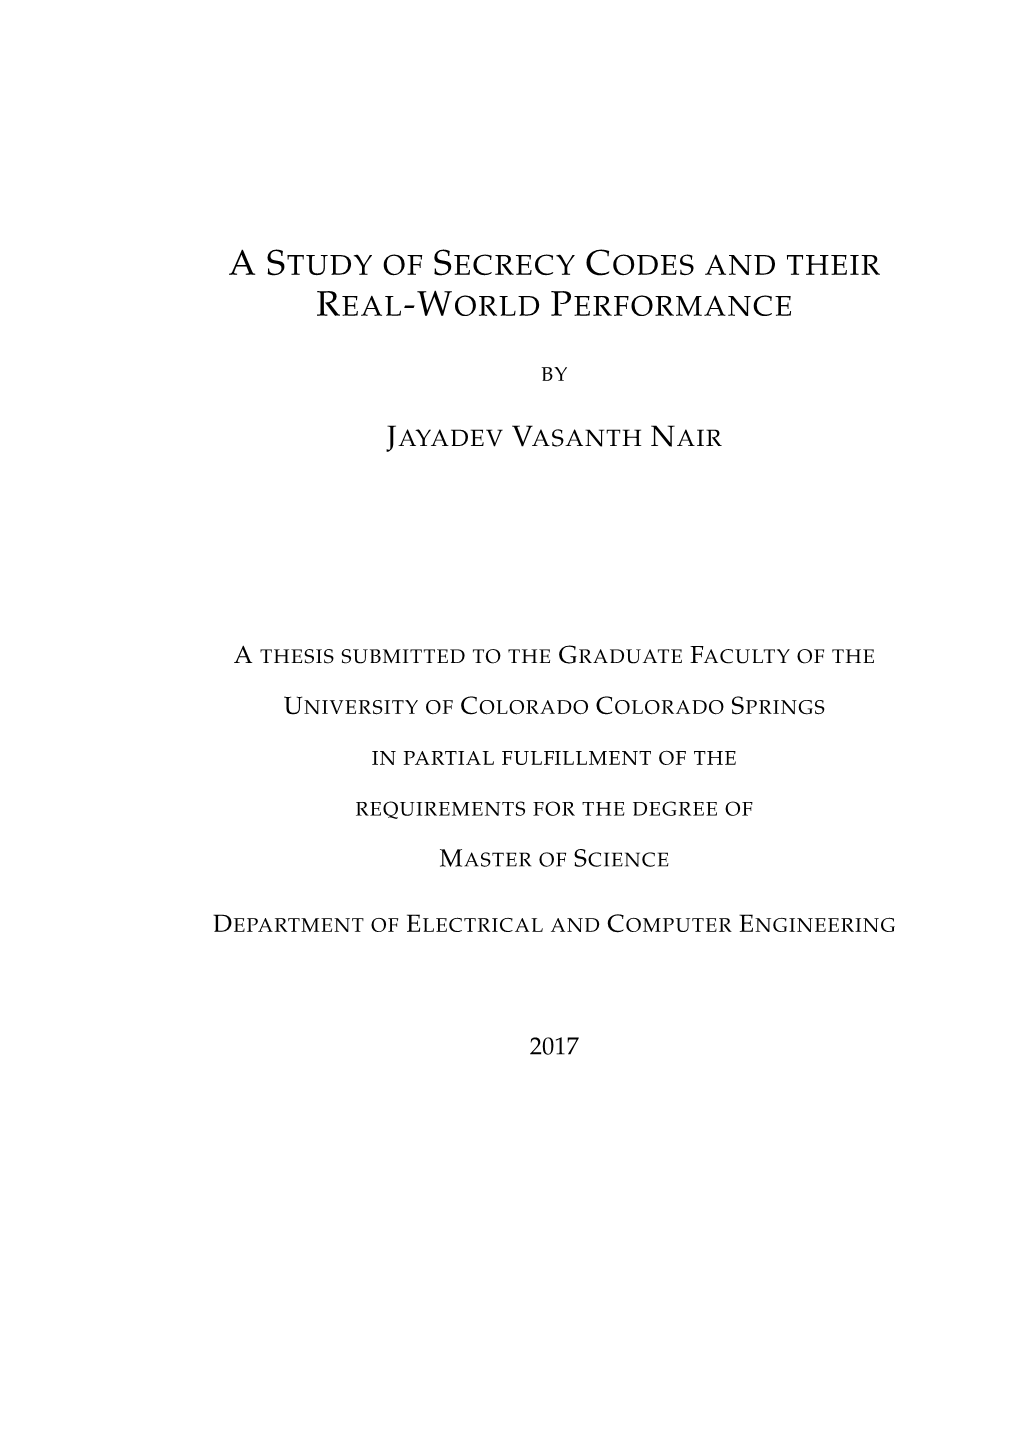 A Study of Secrecy Codes and Their Real-World Performance Thesis Directed by Assistant Professor Willie K